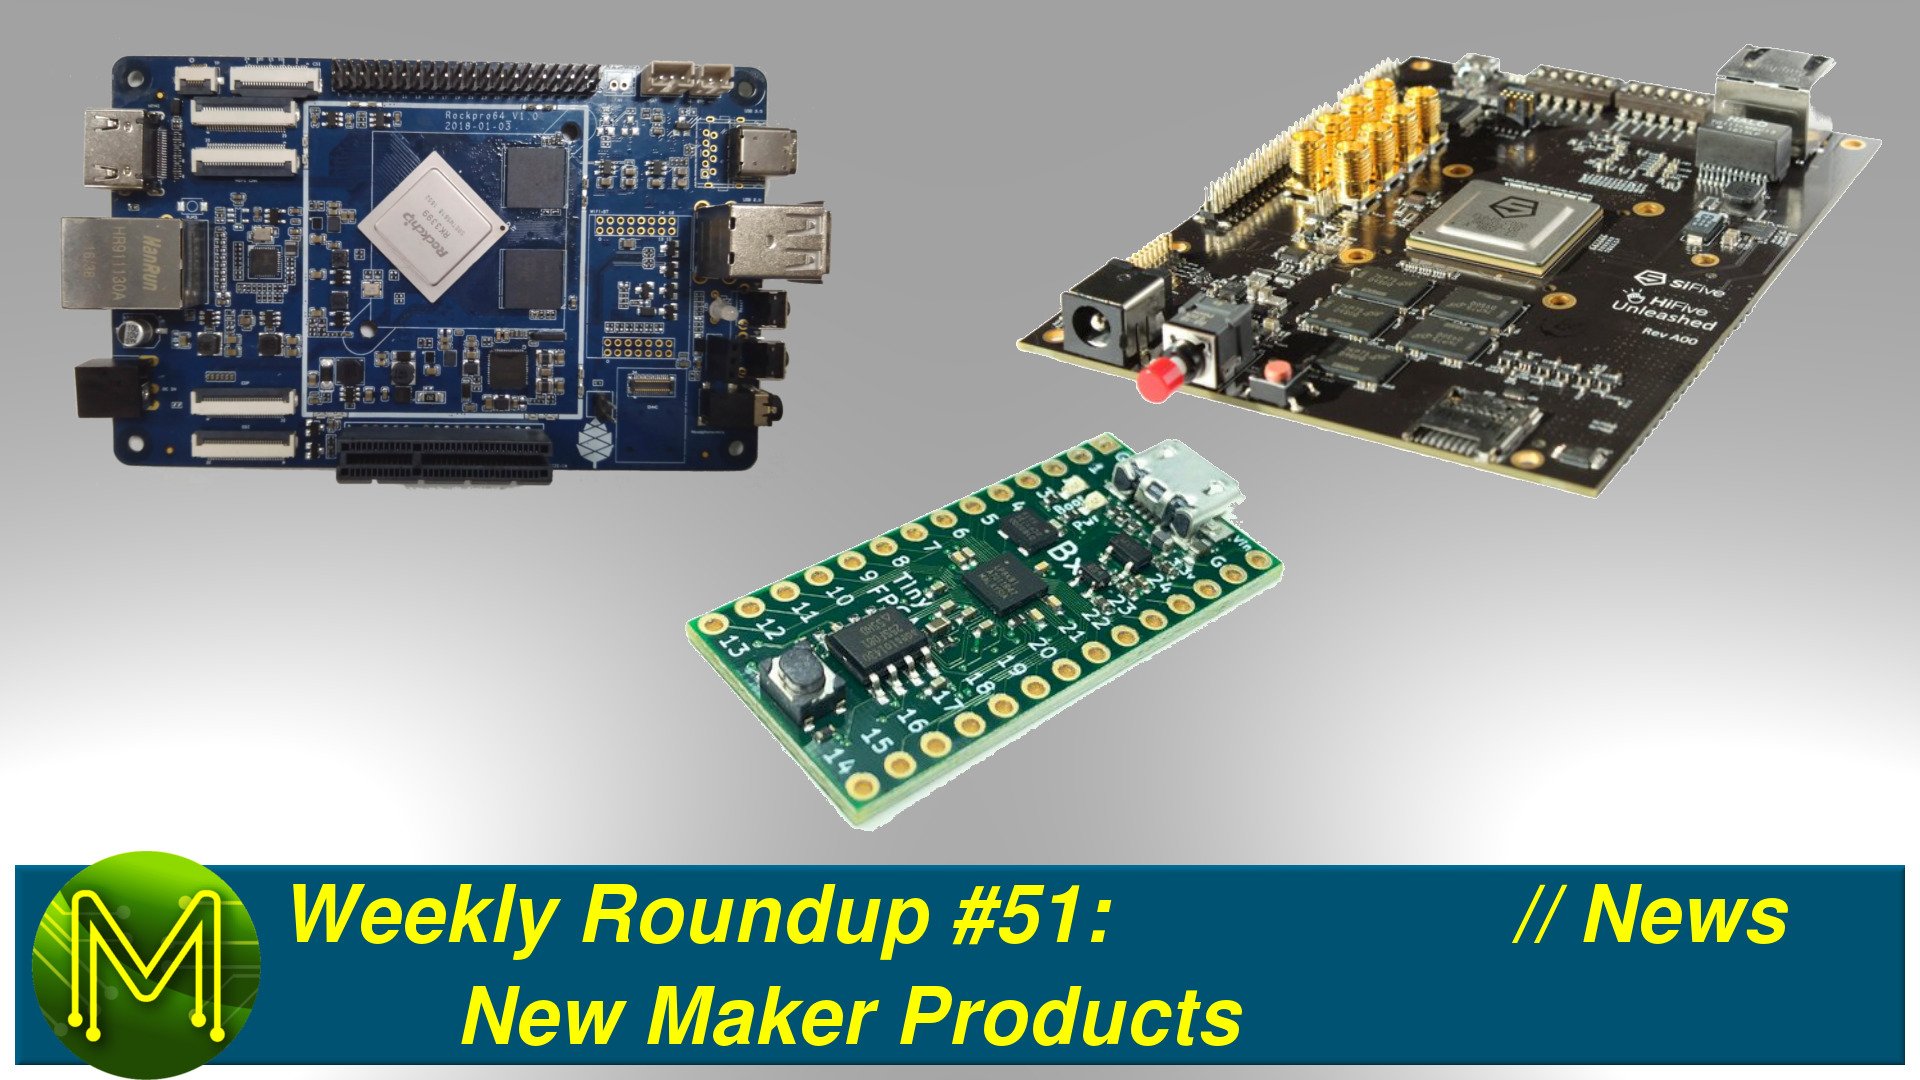 Weekly Roundup #51 - New Maker Products // News